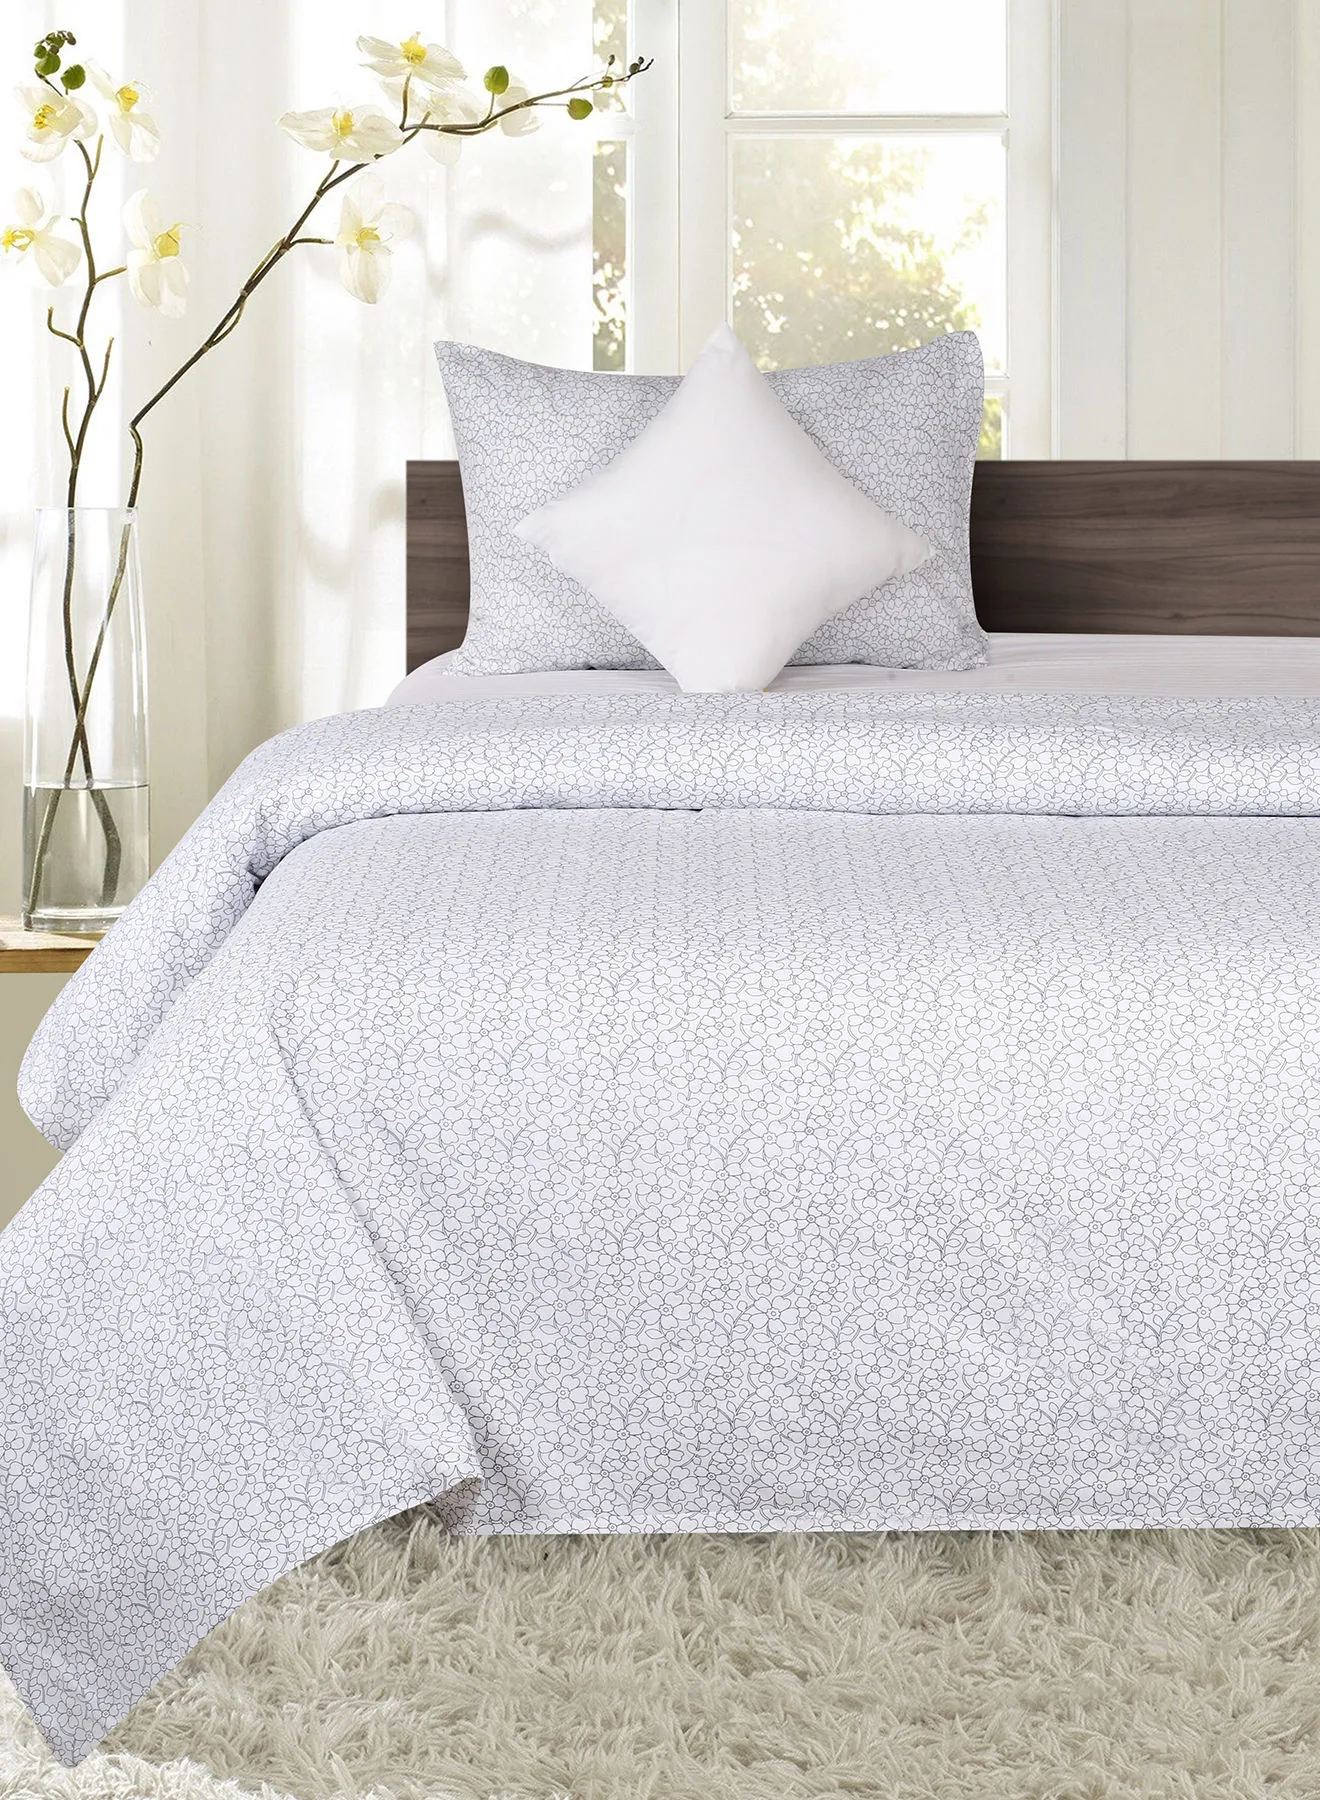 Amal Duvet Cover - With Pillow Cover 50X75 Cm, Comforter 150X200 Cm, 40X40 Cm - For Queen Size Mattress - Pearl White 100% Cotton